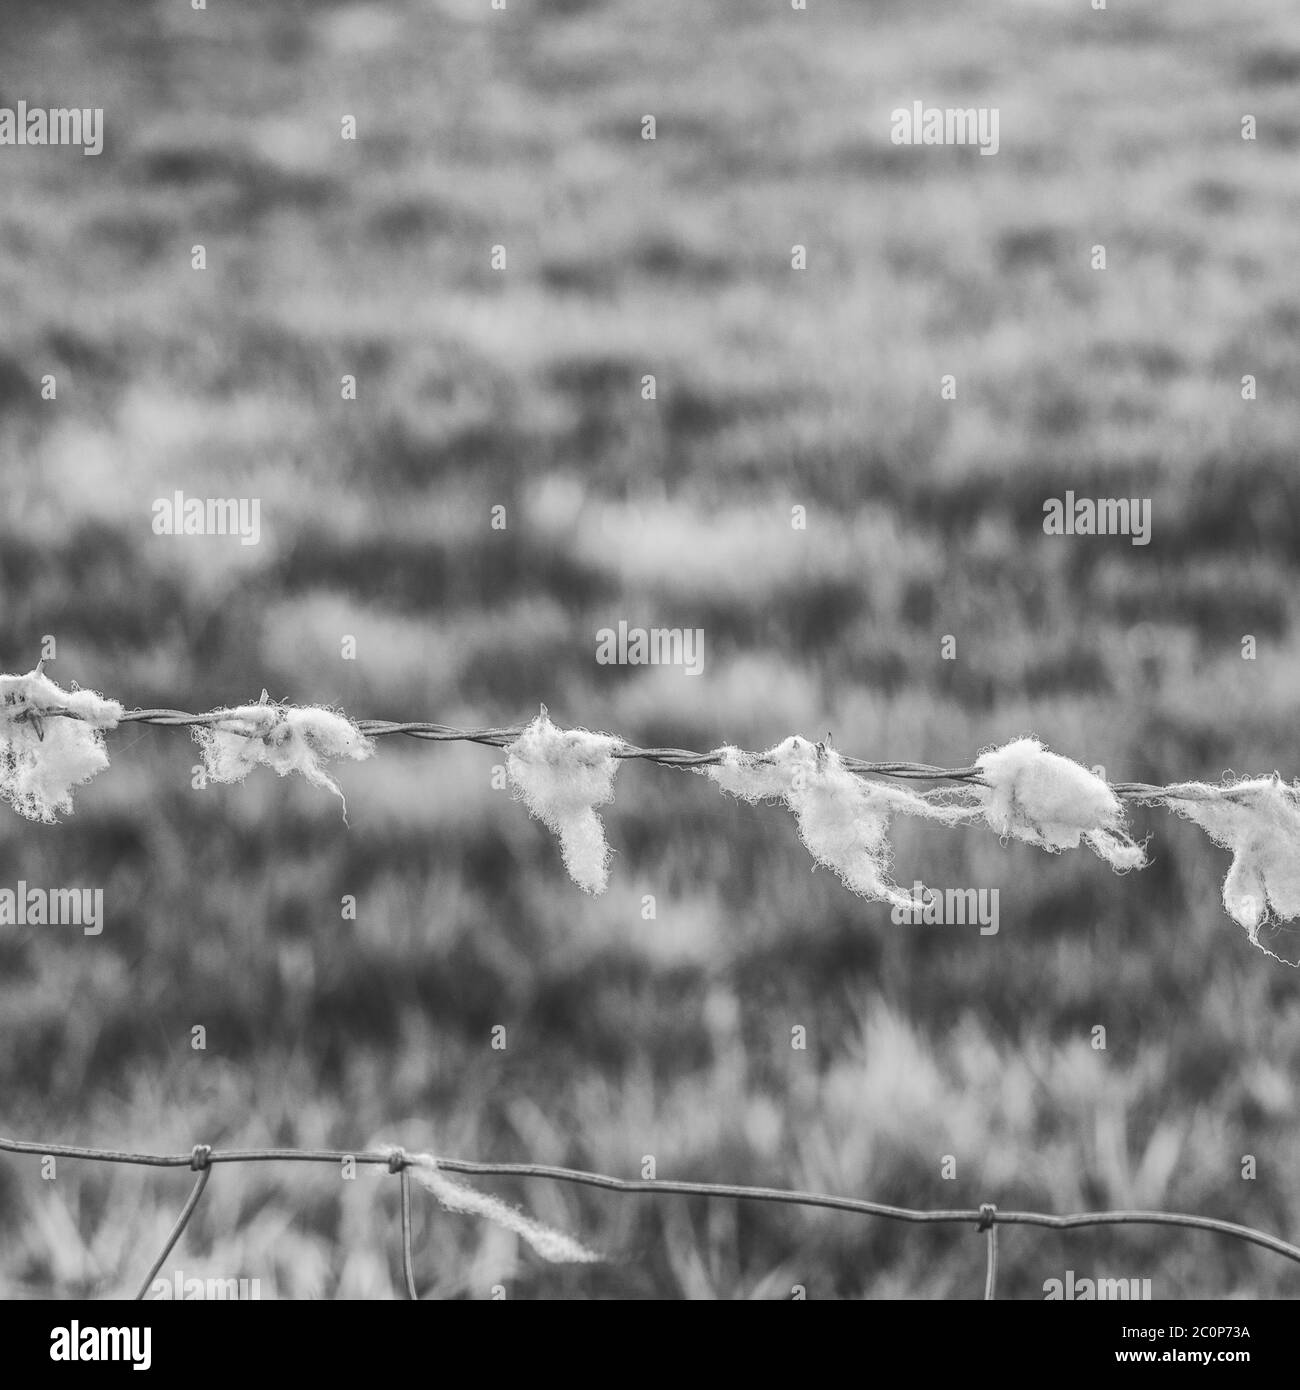 Sheep's wool caught of barbed wire fencing in field. Metaphor being fleeced and swindled. Stock Photo